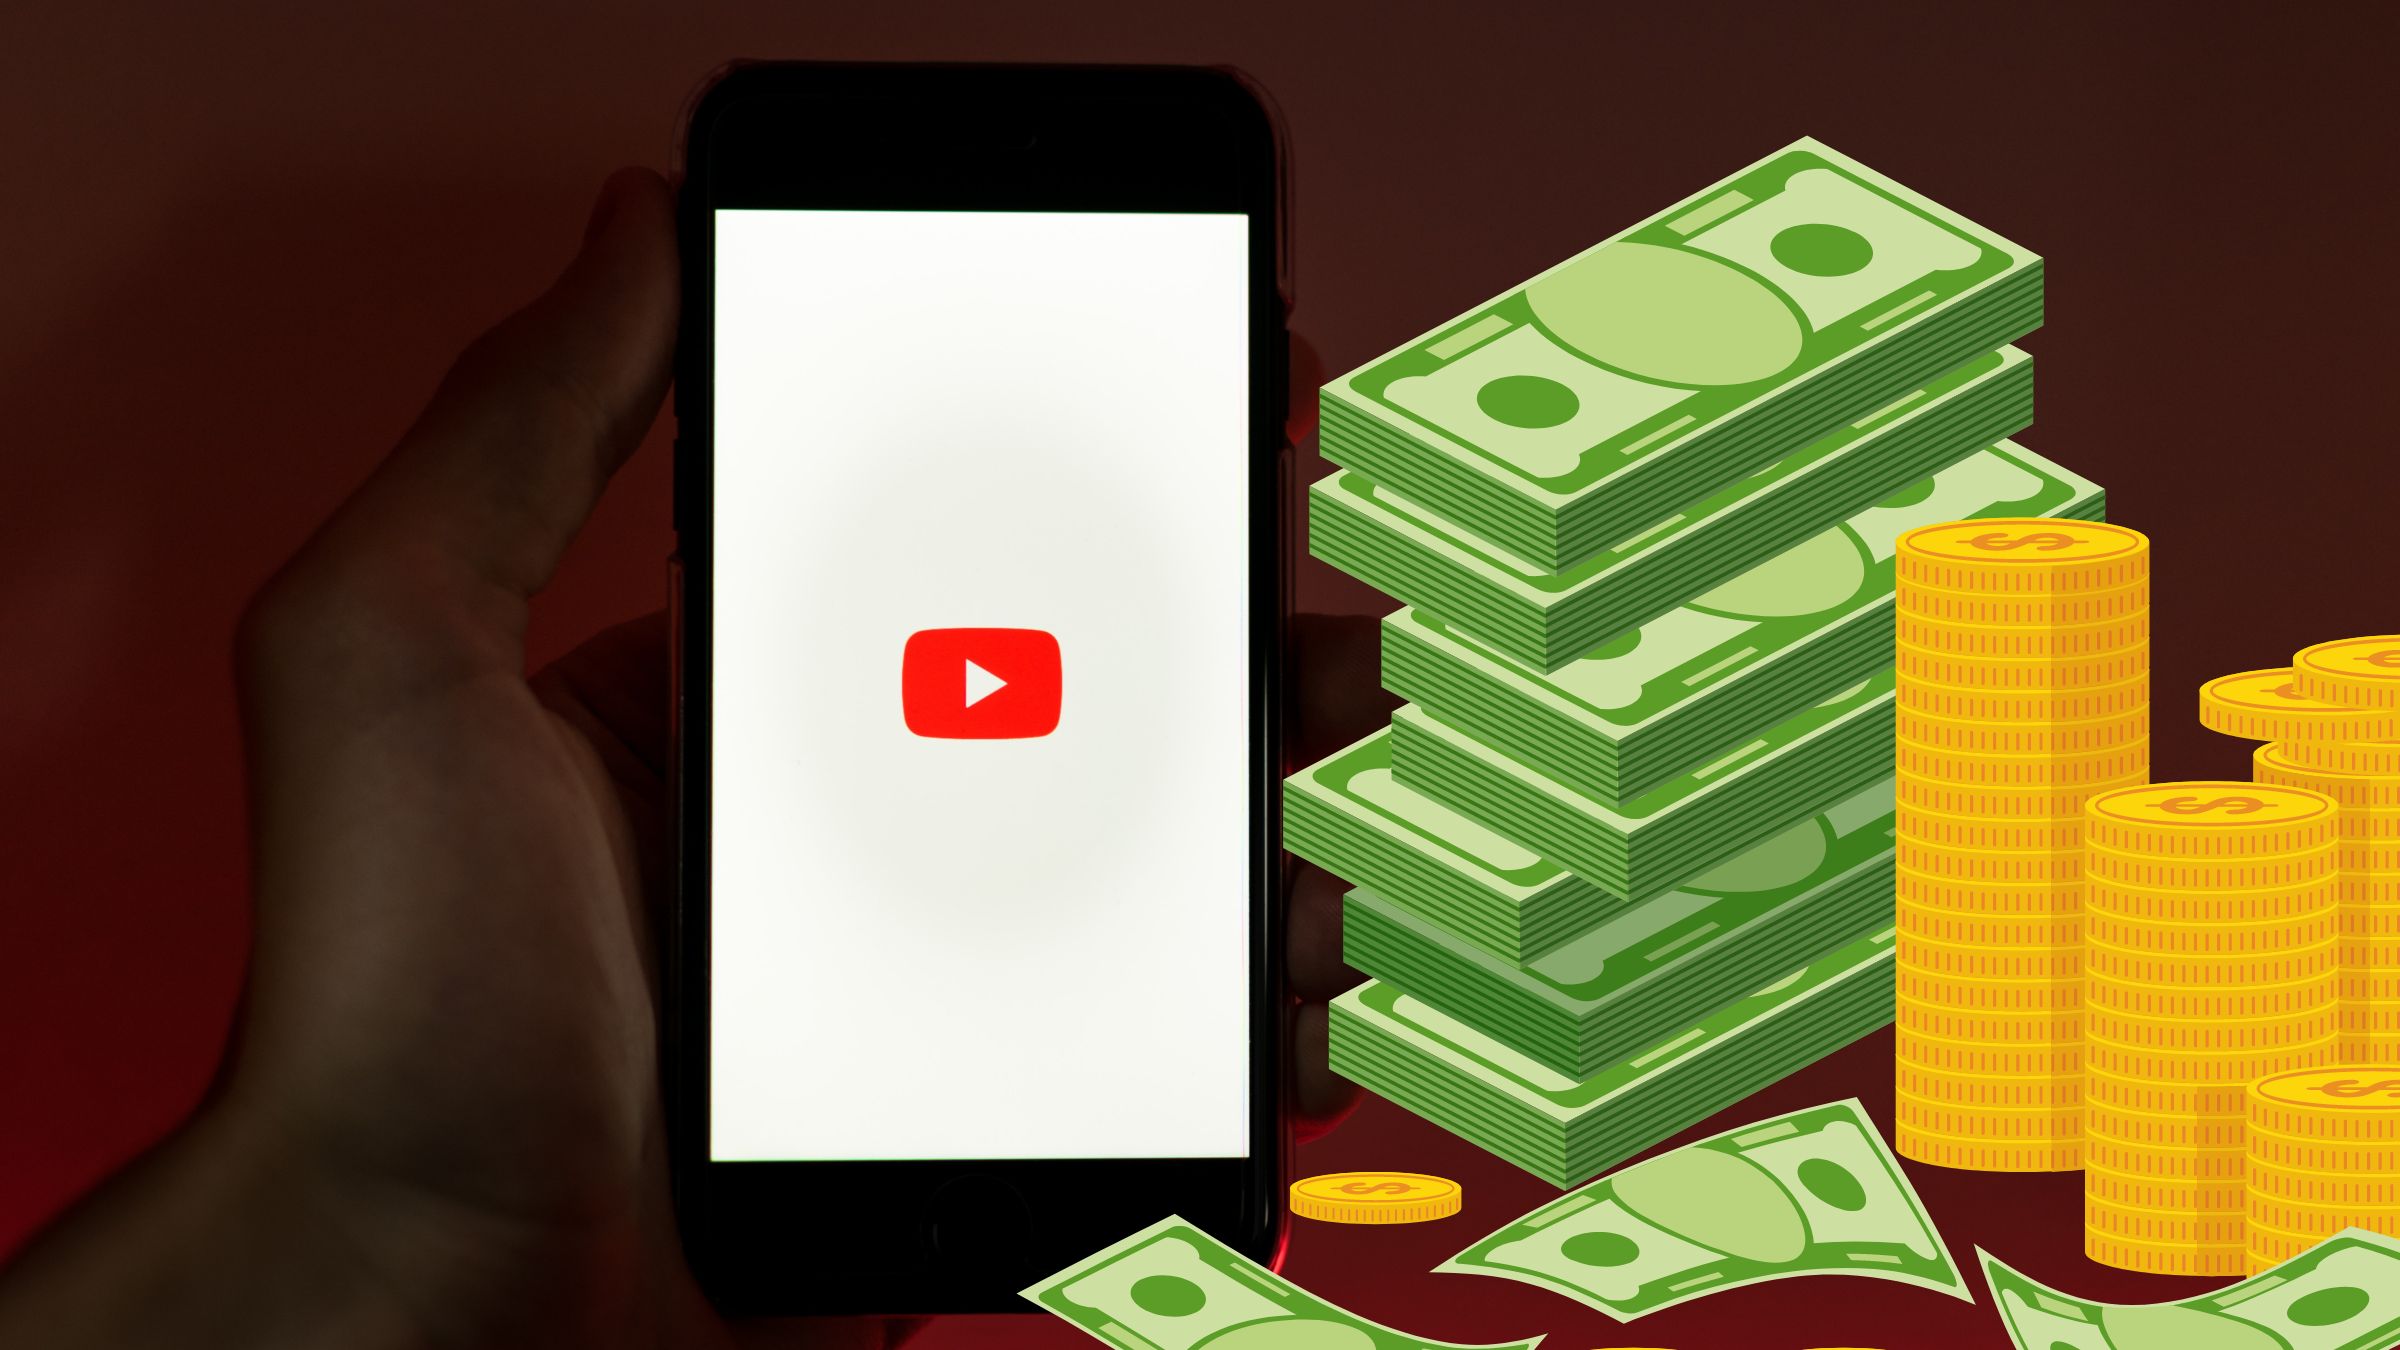 YouTube publishes information about why ad blocking is bad